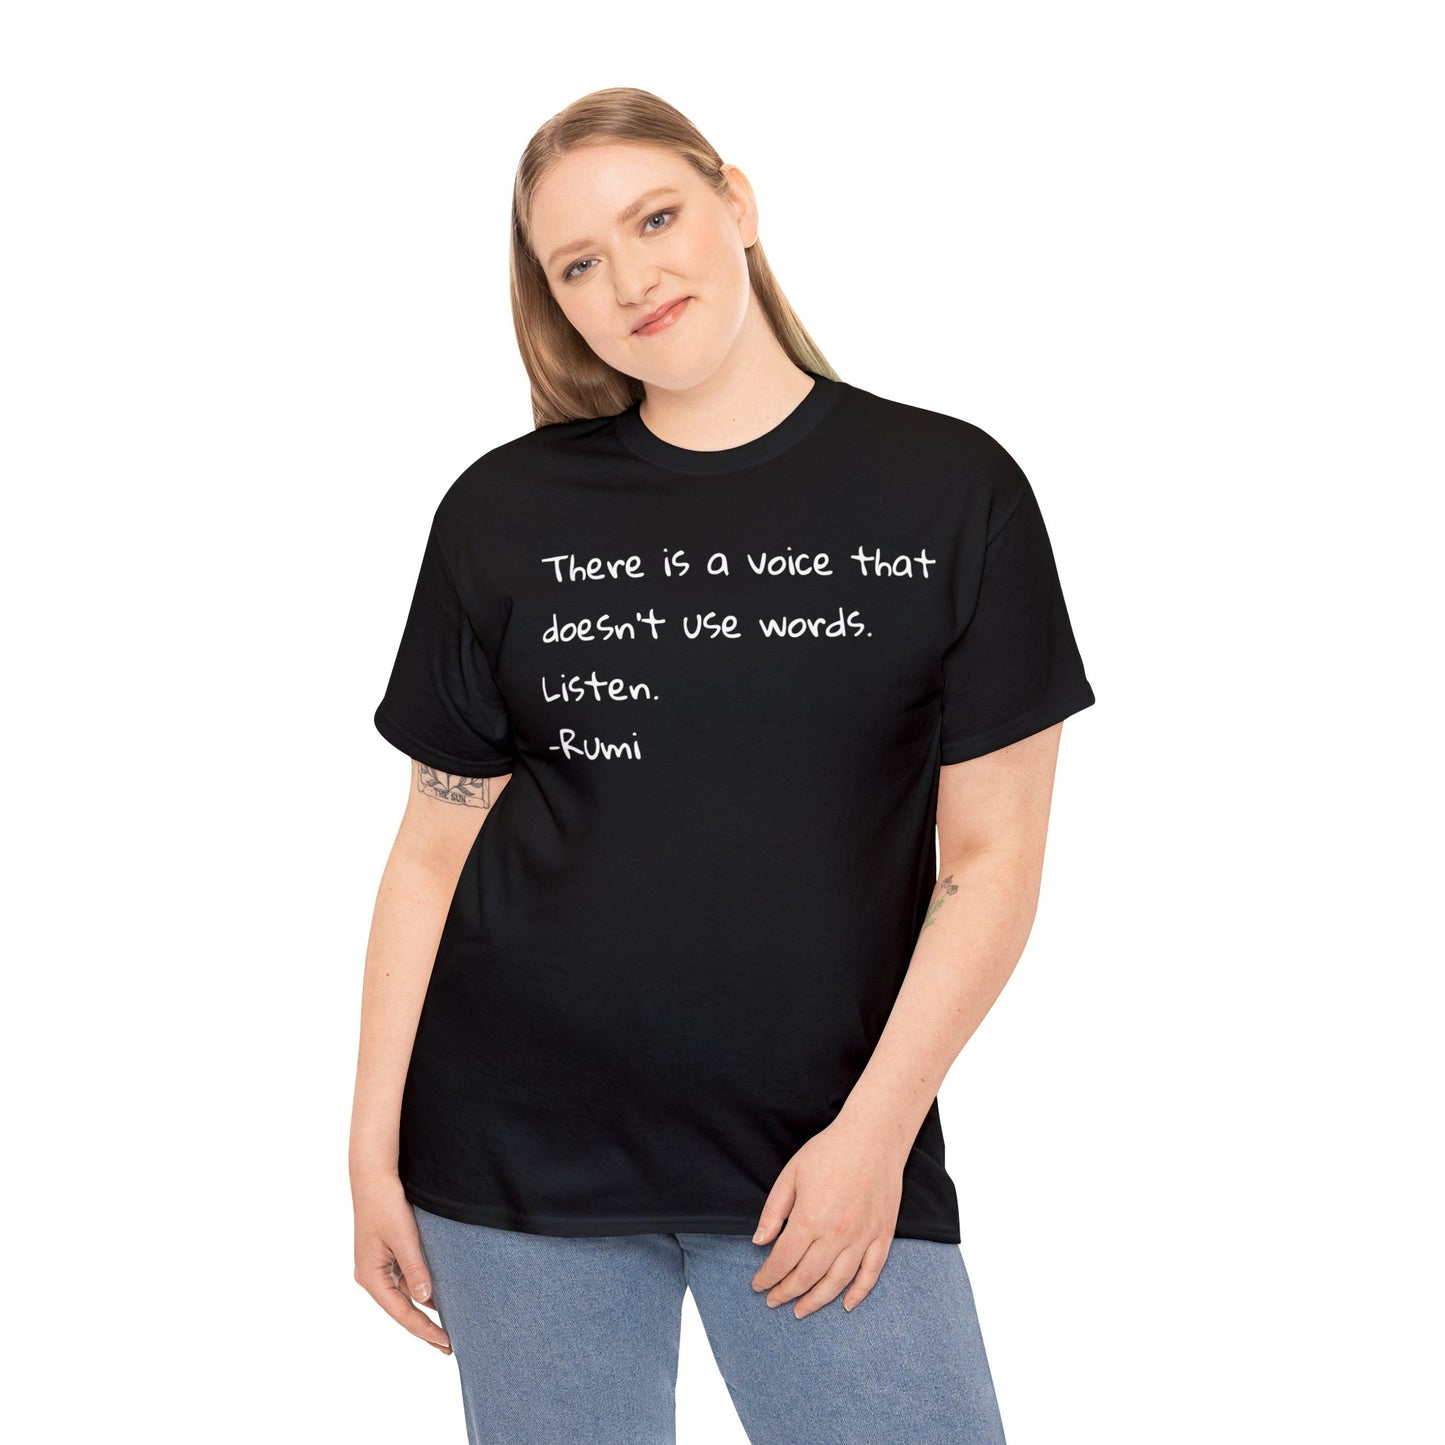 'Rumi' There Is a Voice That Doesn't Use Words T-Shirt